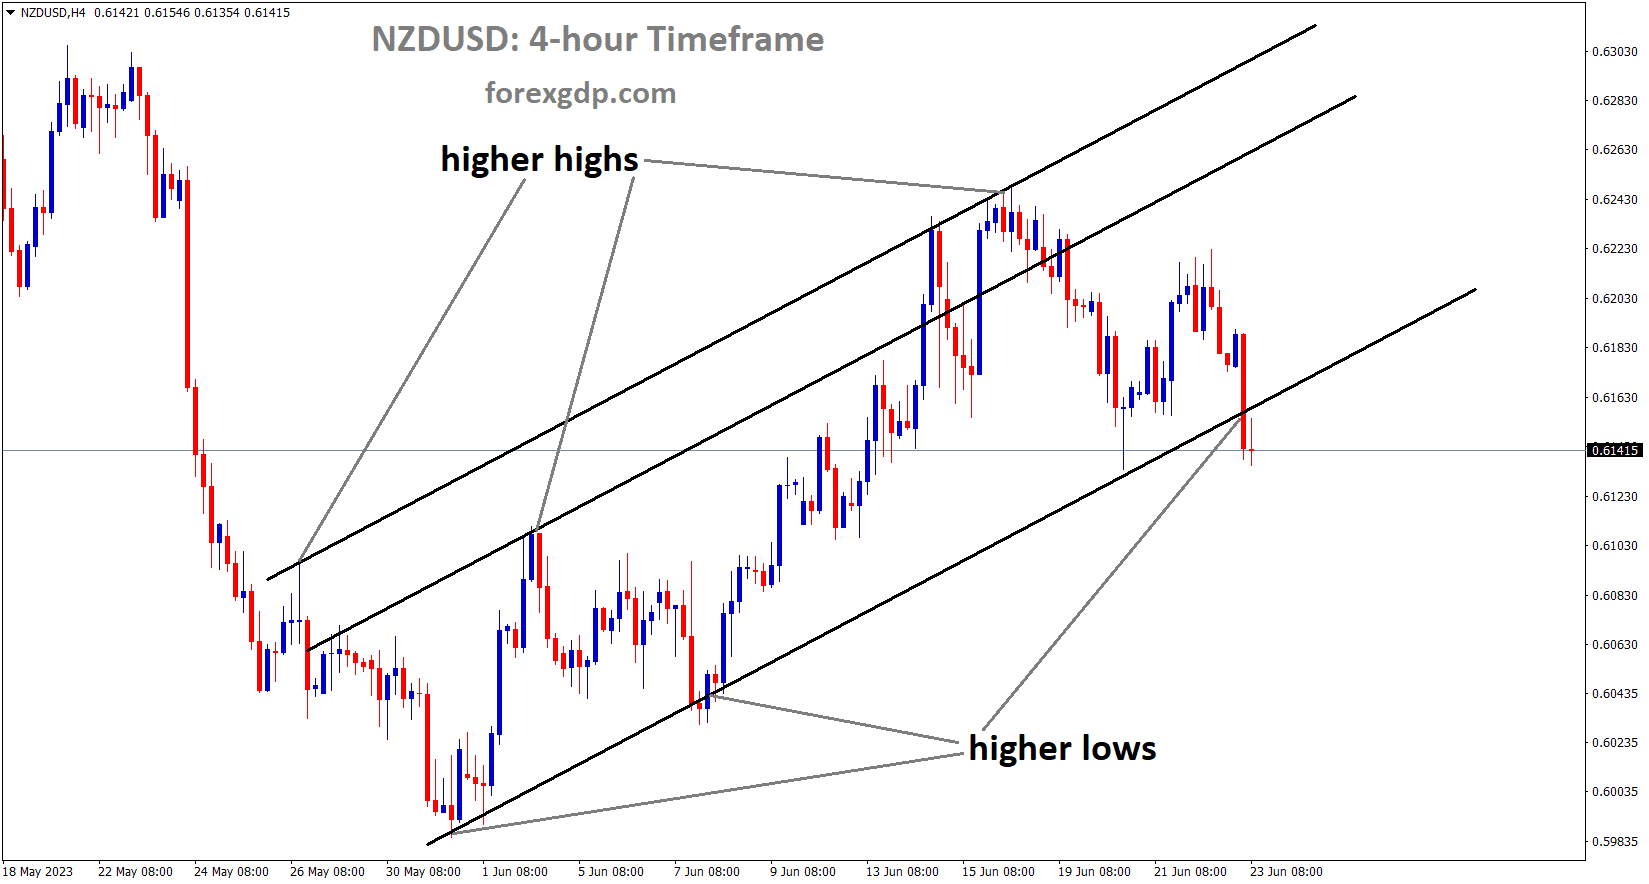 NZDUSD is moving in an Ascending channel and the market has reached the higher low area of the channel